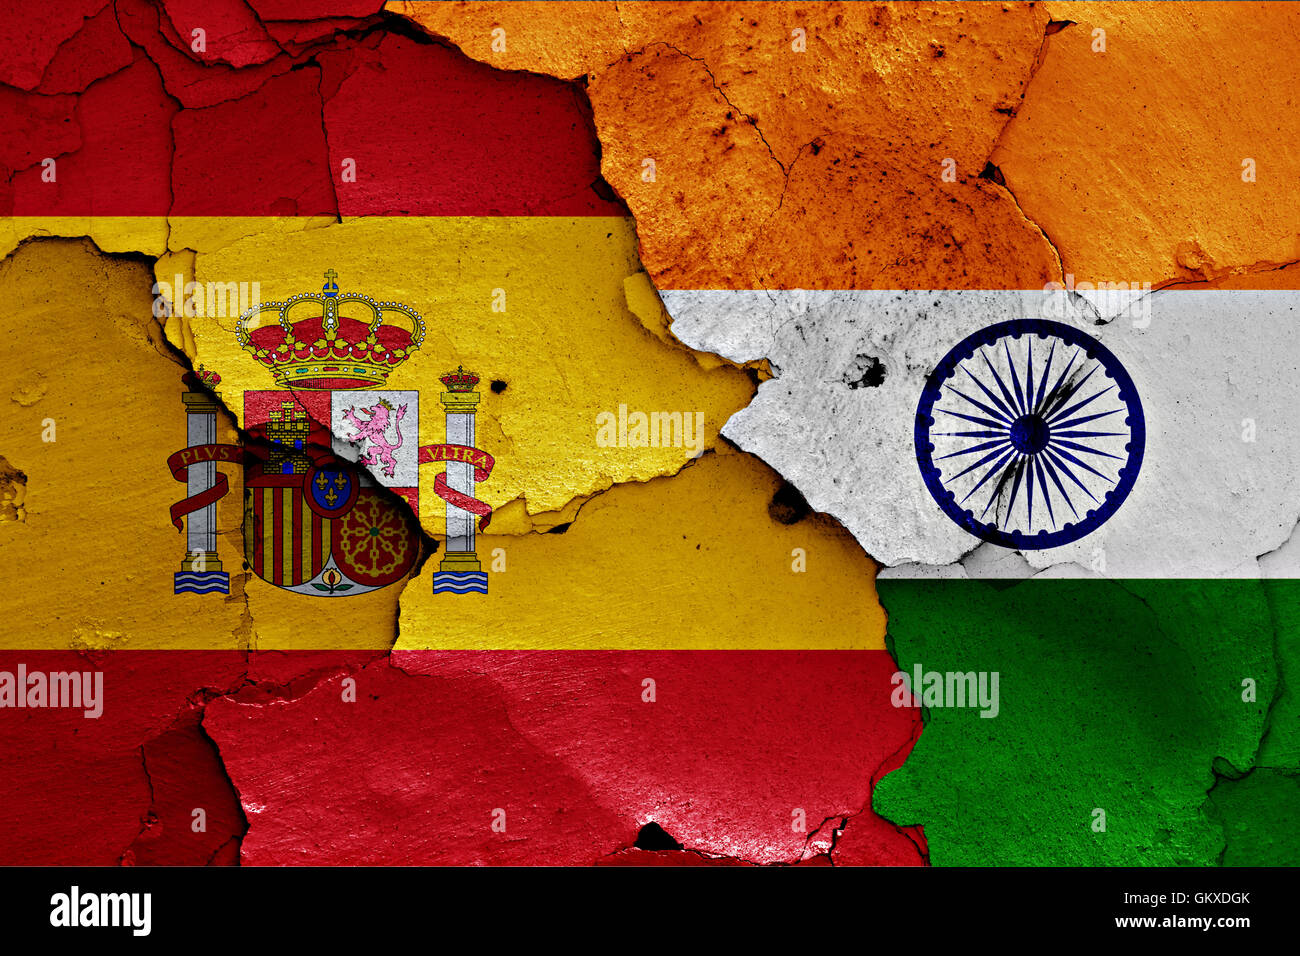 flags of Spain and India painted on cracked wall Stock Photo